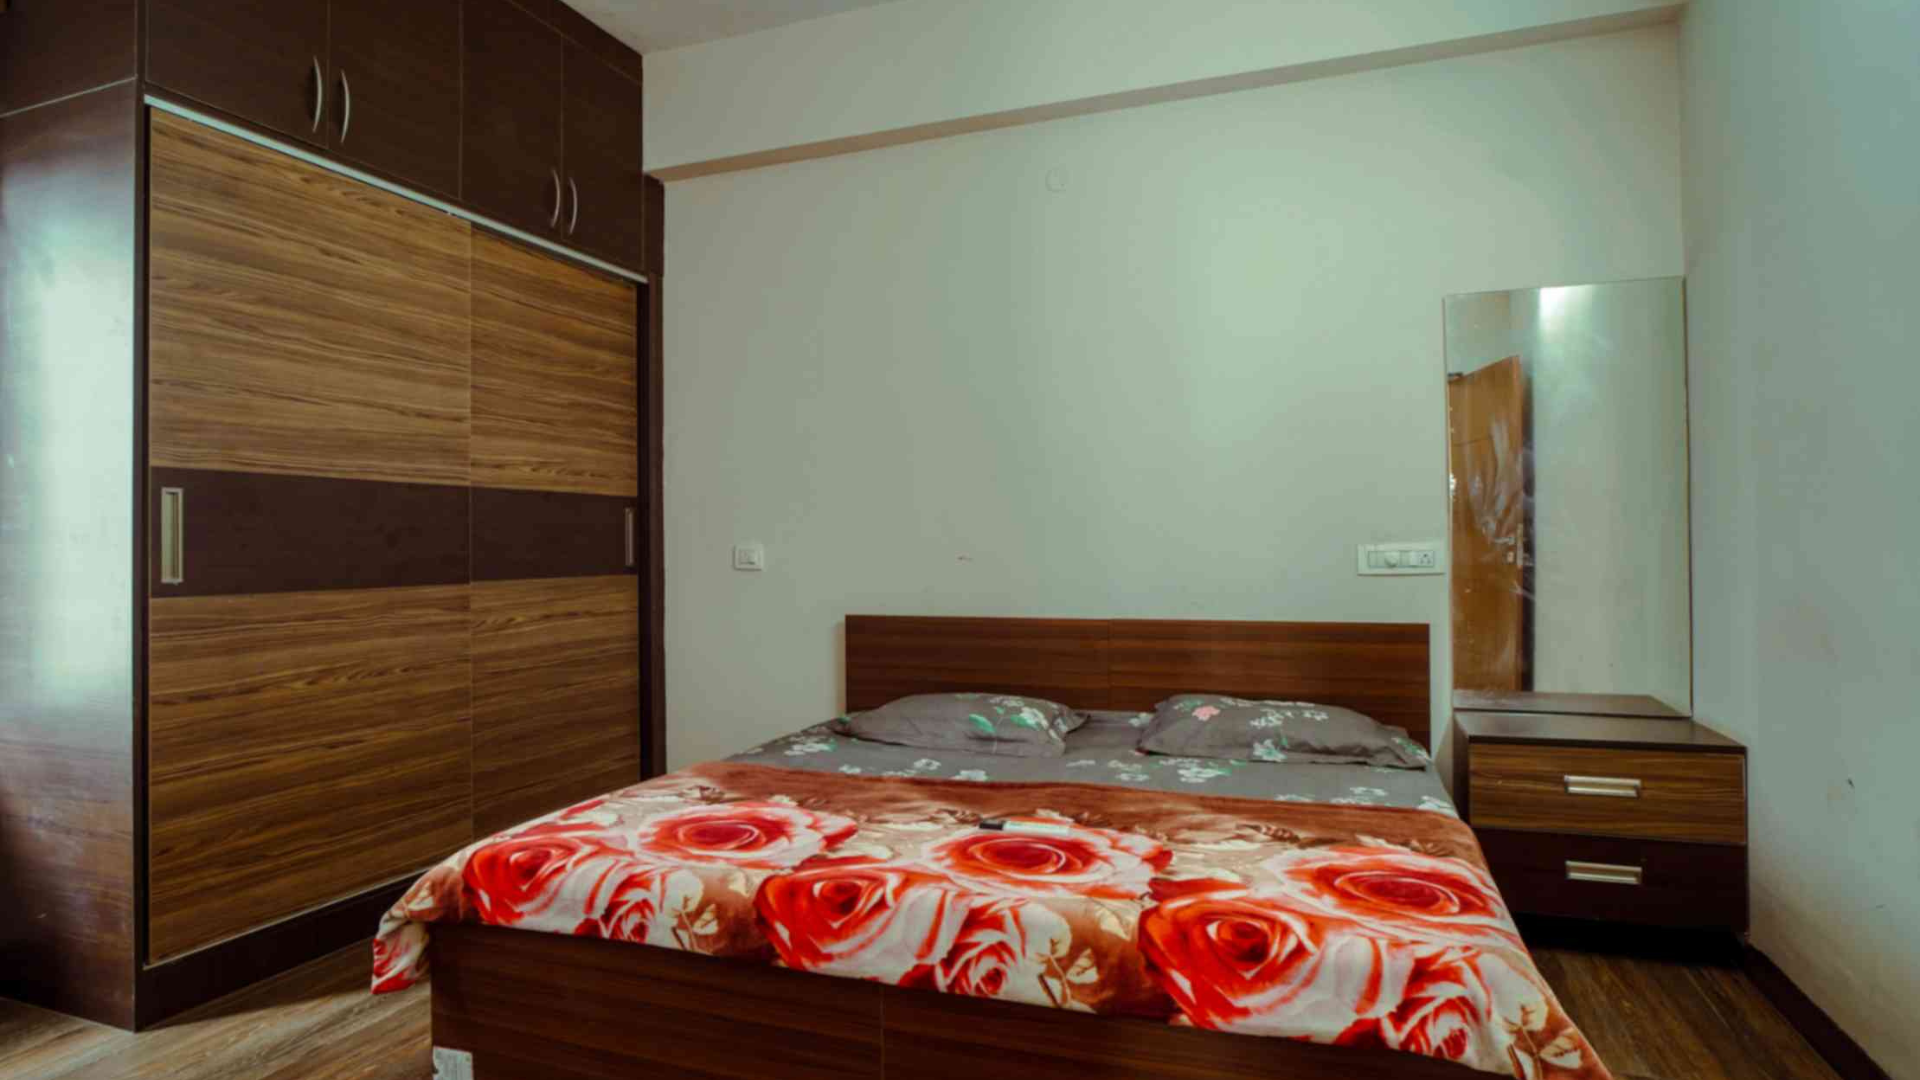 Service apartment in hyderabad